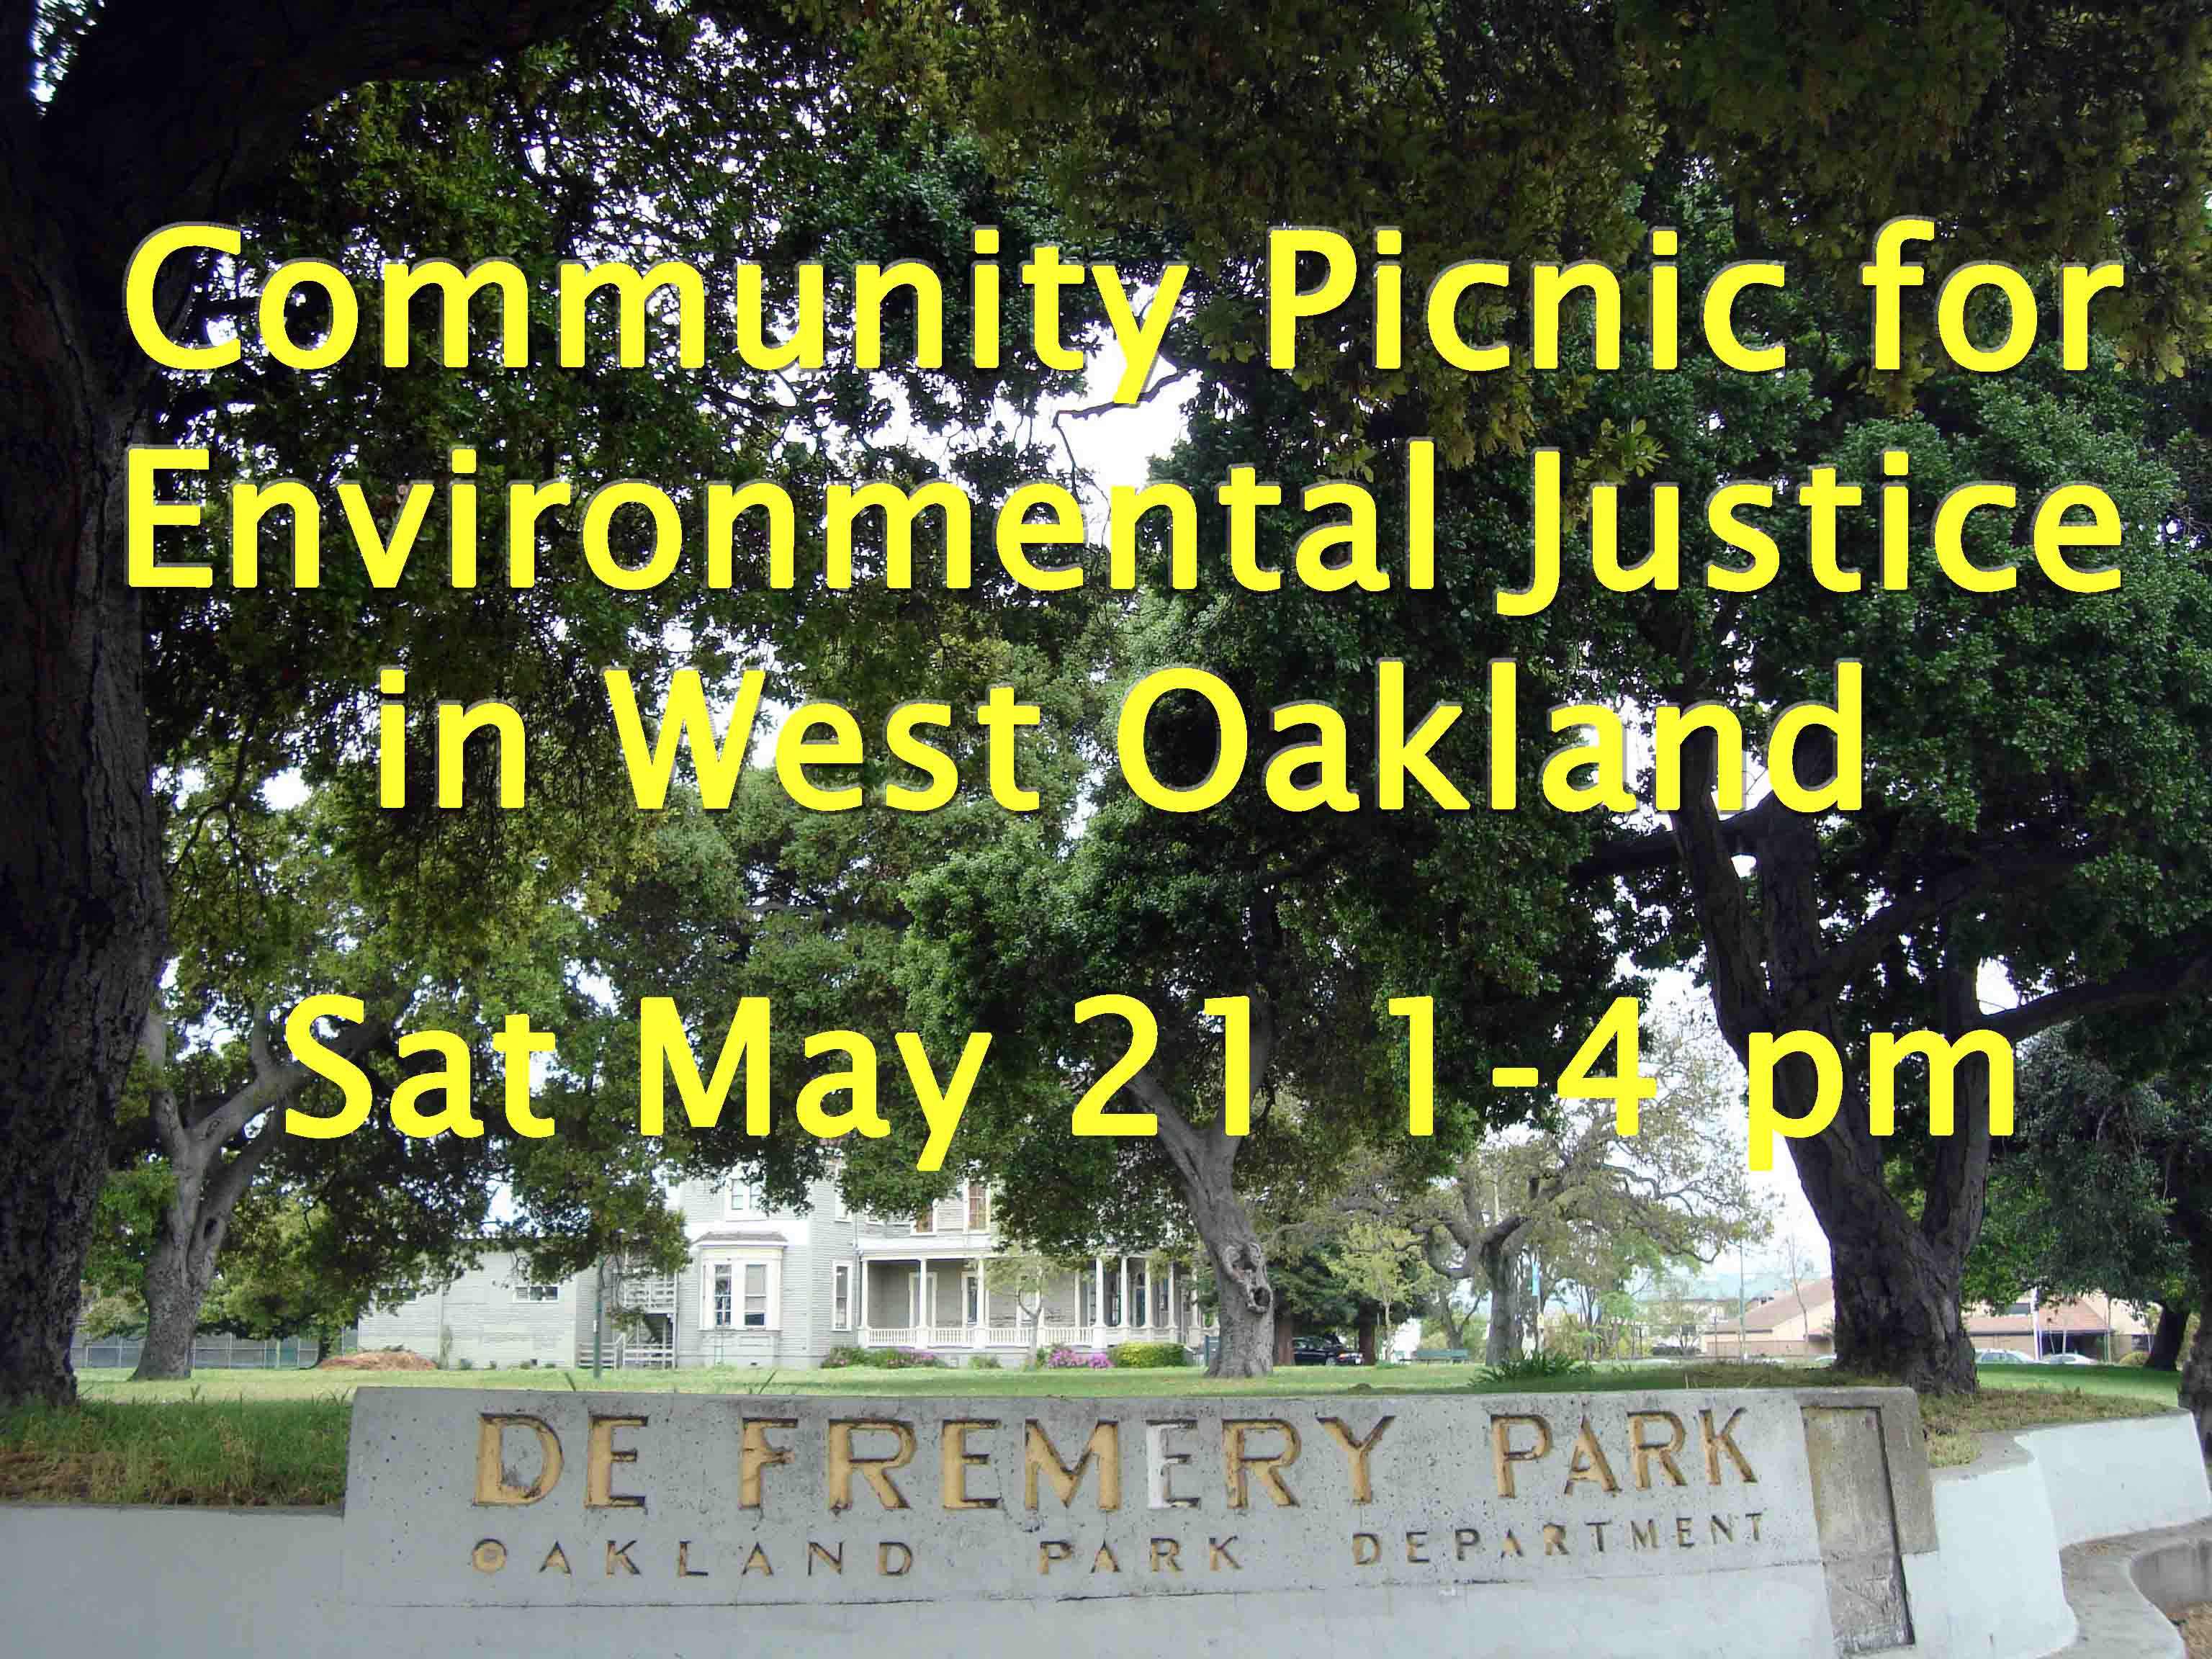 Come to Community Picnic for Environmental Justice at Defremery Park May 21, 1-4 p.m.